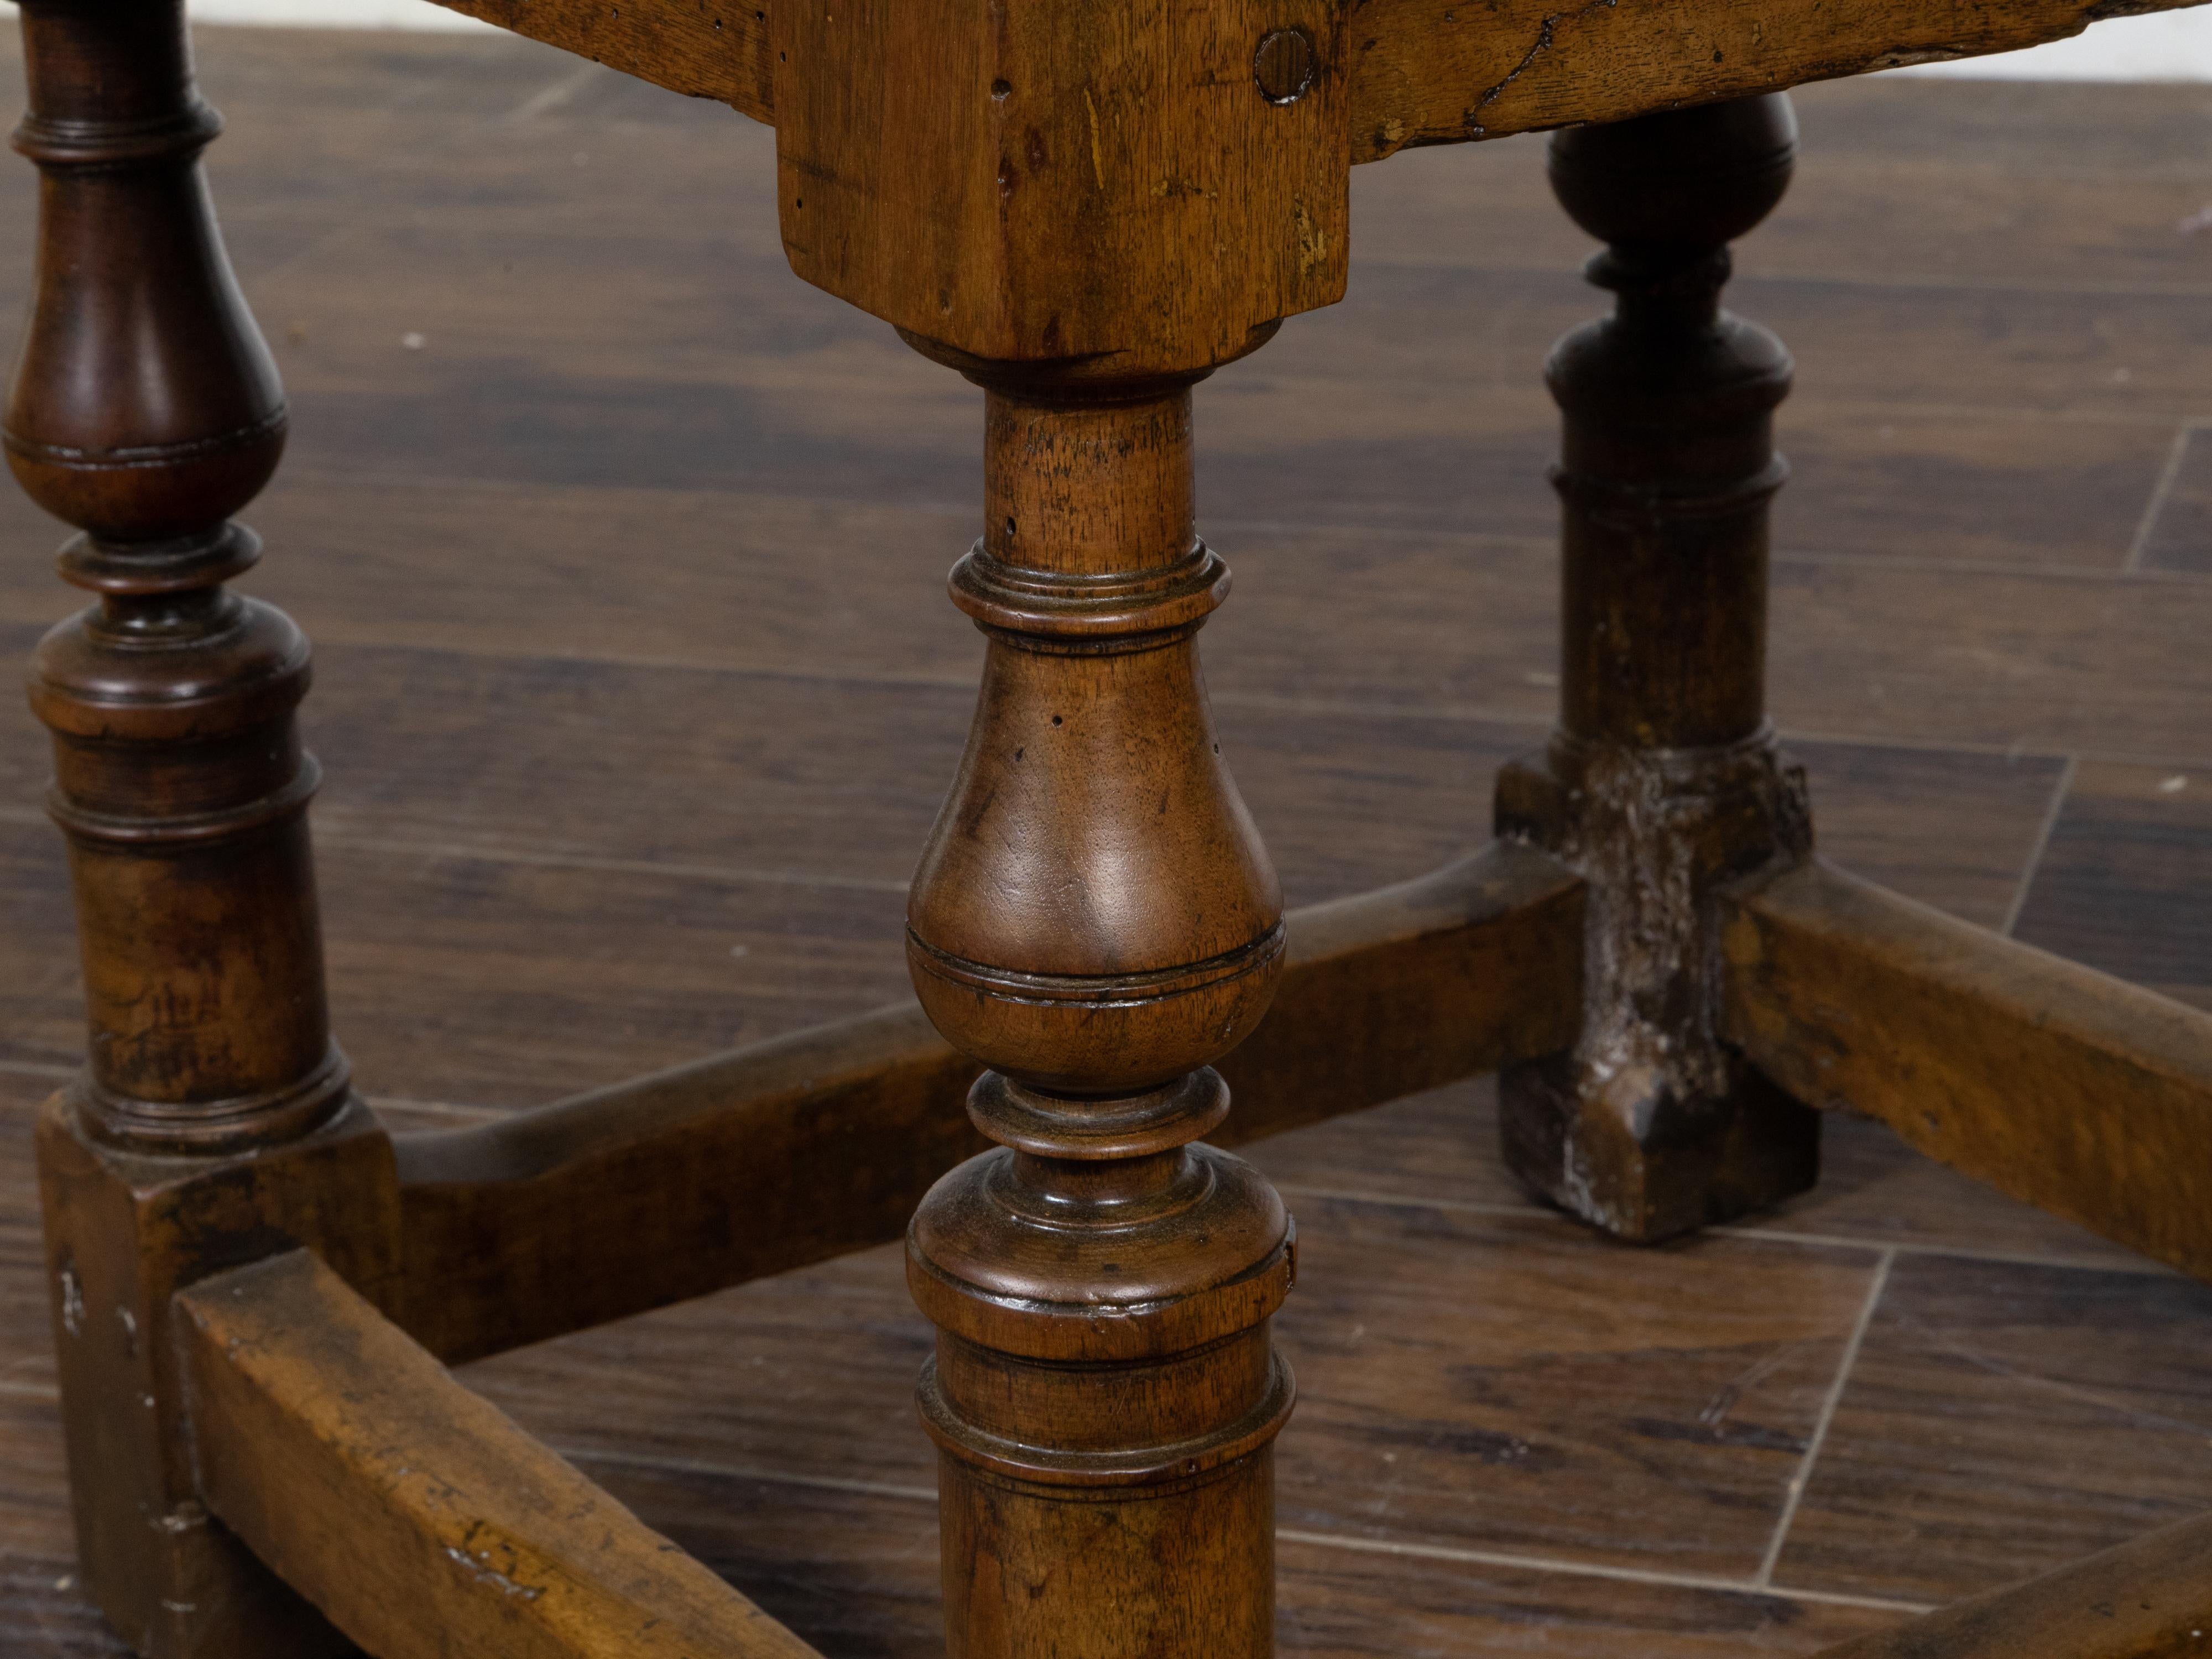 An English walnut side table from the 19th century with single drawer, turned baluster legs, plain side stretchers and nice patina. A blend of ageless charm and practicality, this 19th-century English walnut side table exudes an air of refined